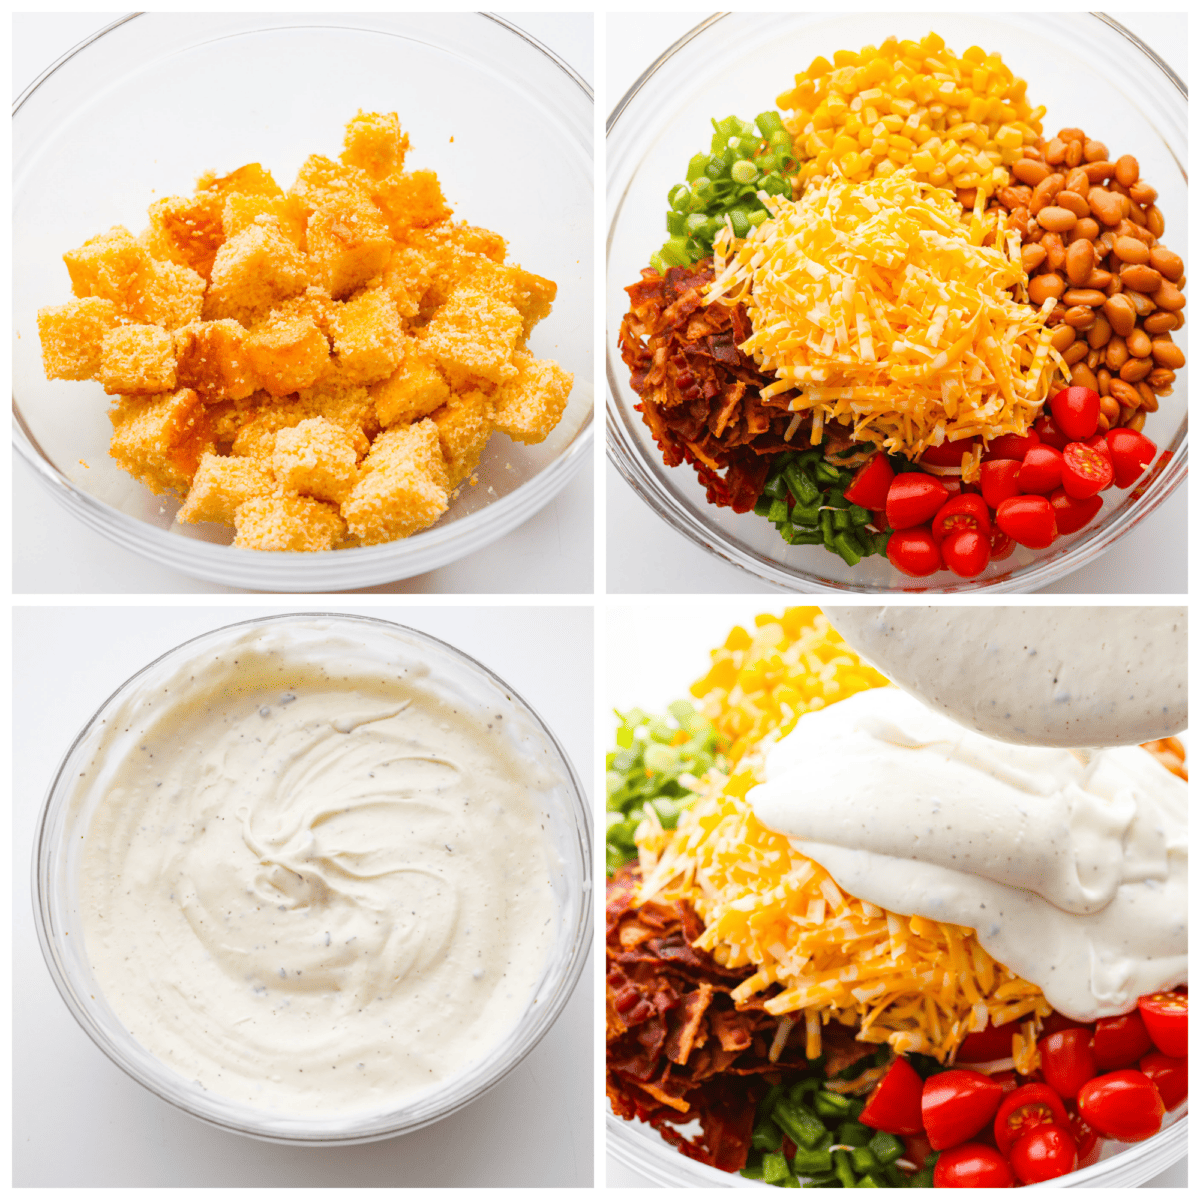 First photo of cornbread cubes in a bowl. Second photo of the salad ingredients added to the bowl. Third photo of the dressing mixed in a bowl. Fourth photo of the dressing pouring on top of the salad ingredients. 